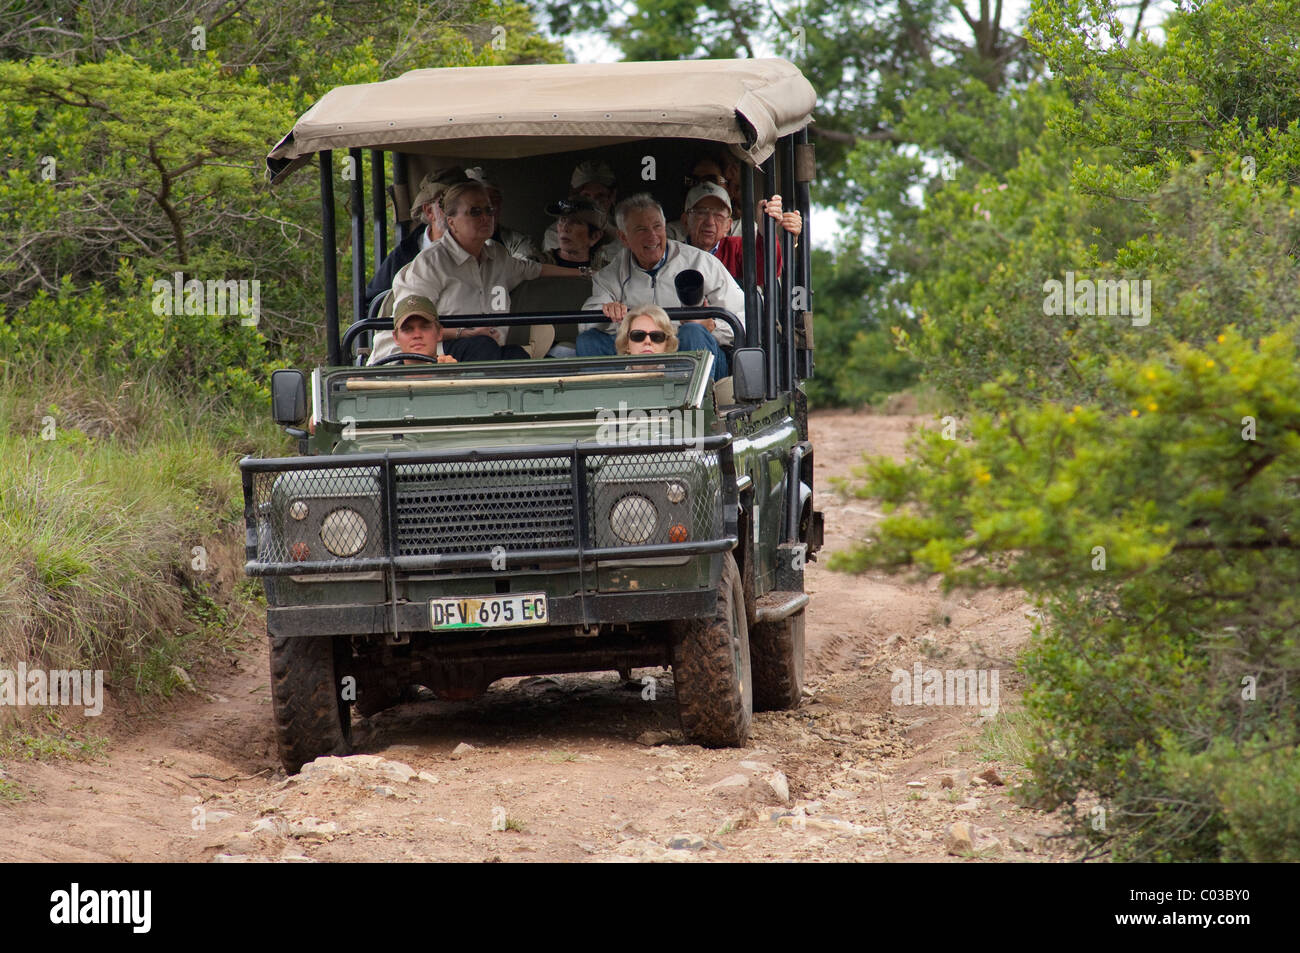 South Africa, Eastern Cape, East London, Inkwenkwezi Private Game Reserve. Stock Photo